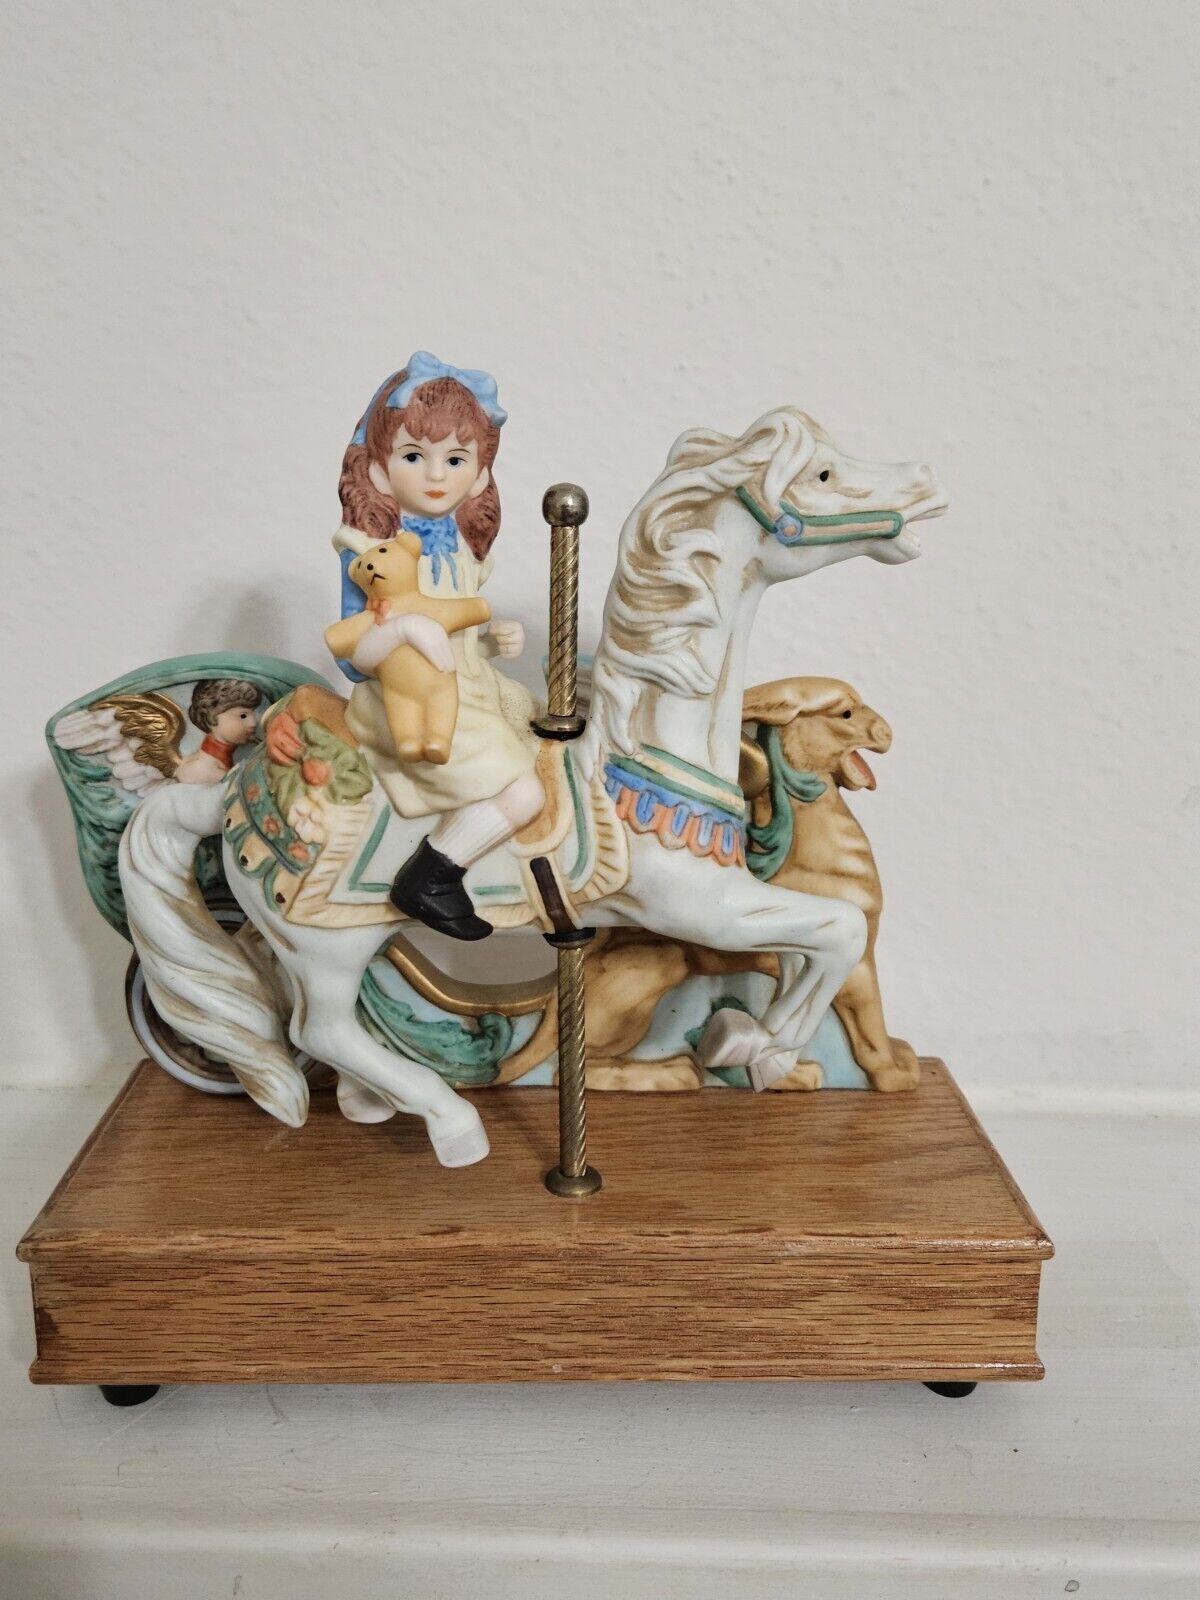 VINTAGE WILLITTS MELODIES CAROUSEL HORSE MUSIC BOX GIRL HOLDING TEDDY BEAR WORKS